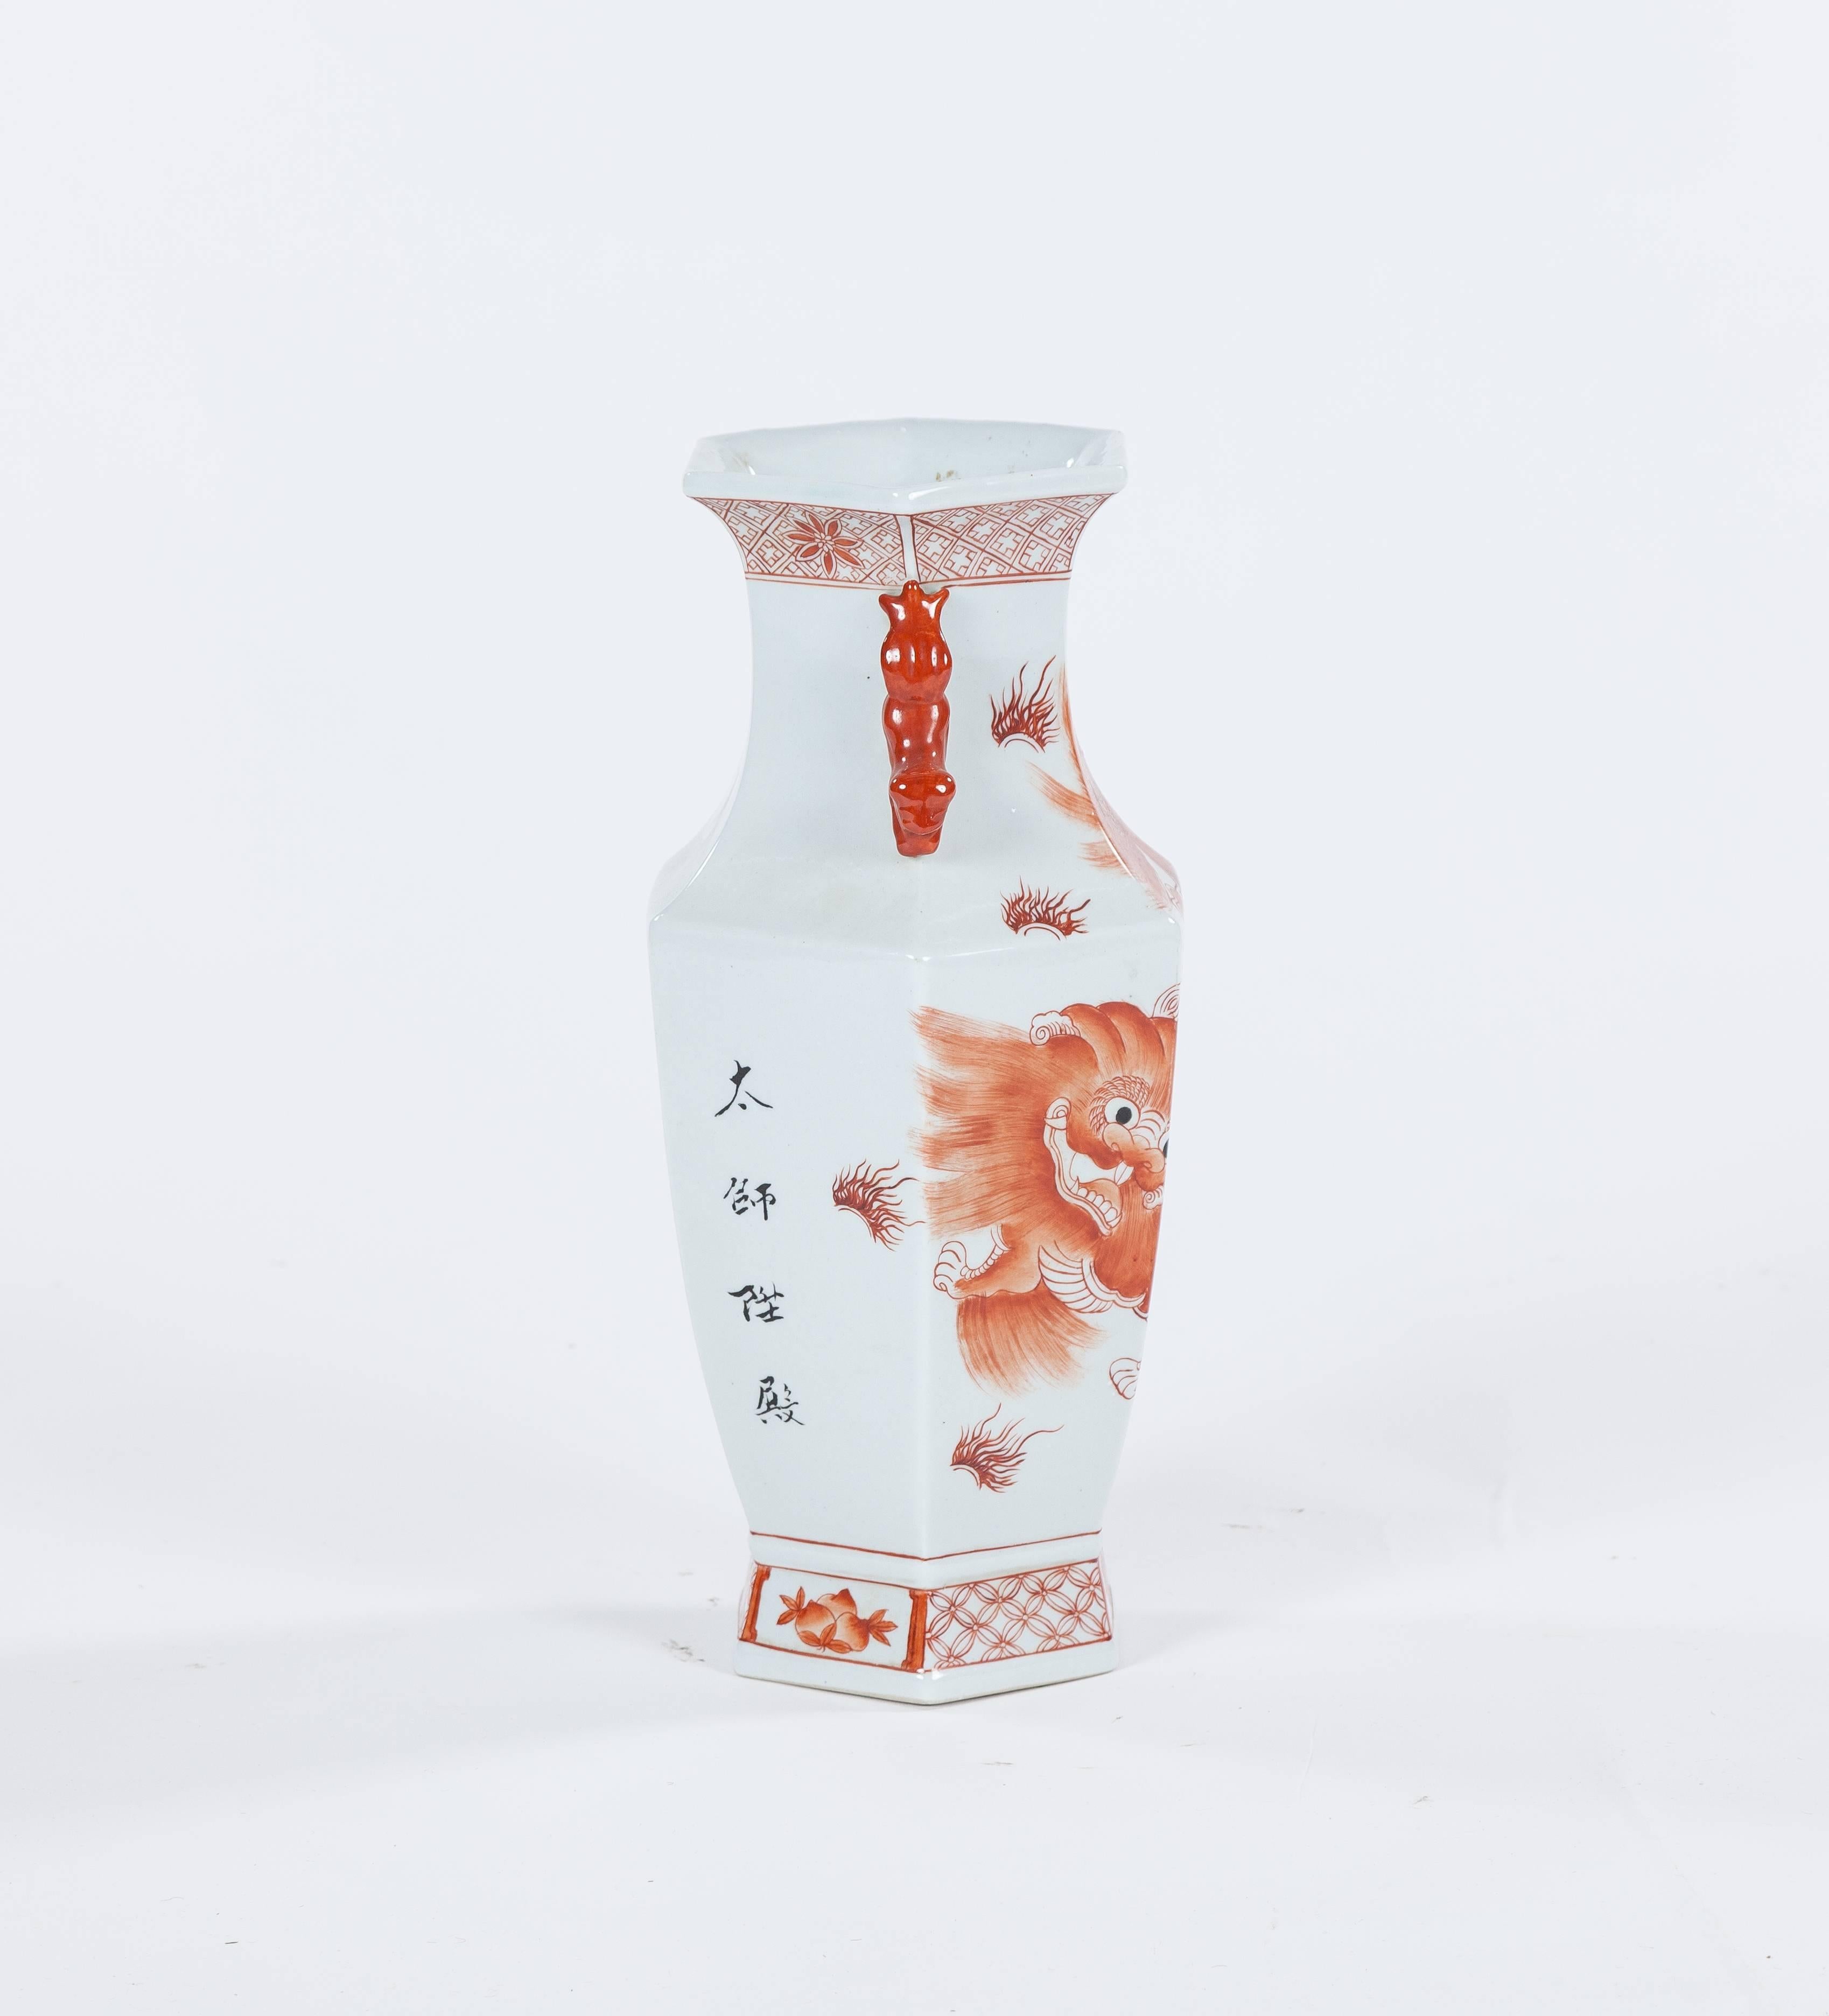 Pair of Vintage Orange and White Chinese Porcelain Vases, Early 20th Century In Good Condition For Sale In Wilmington, DE